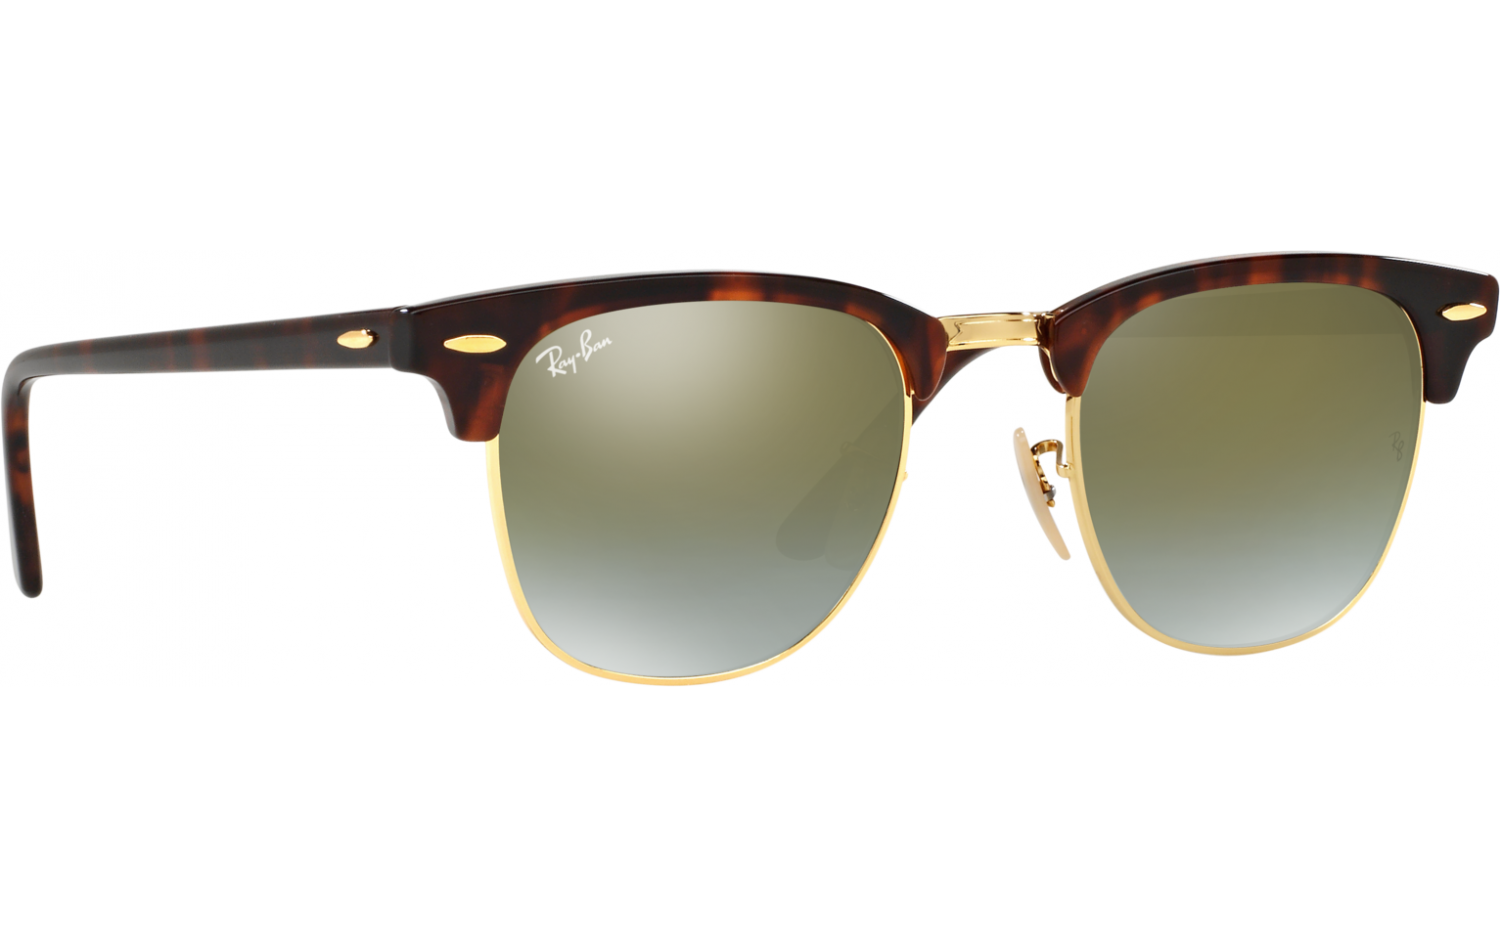 Ray-Ban Clubmaster RB3016 990/9J 51 Sunglasses | Shade Station